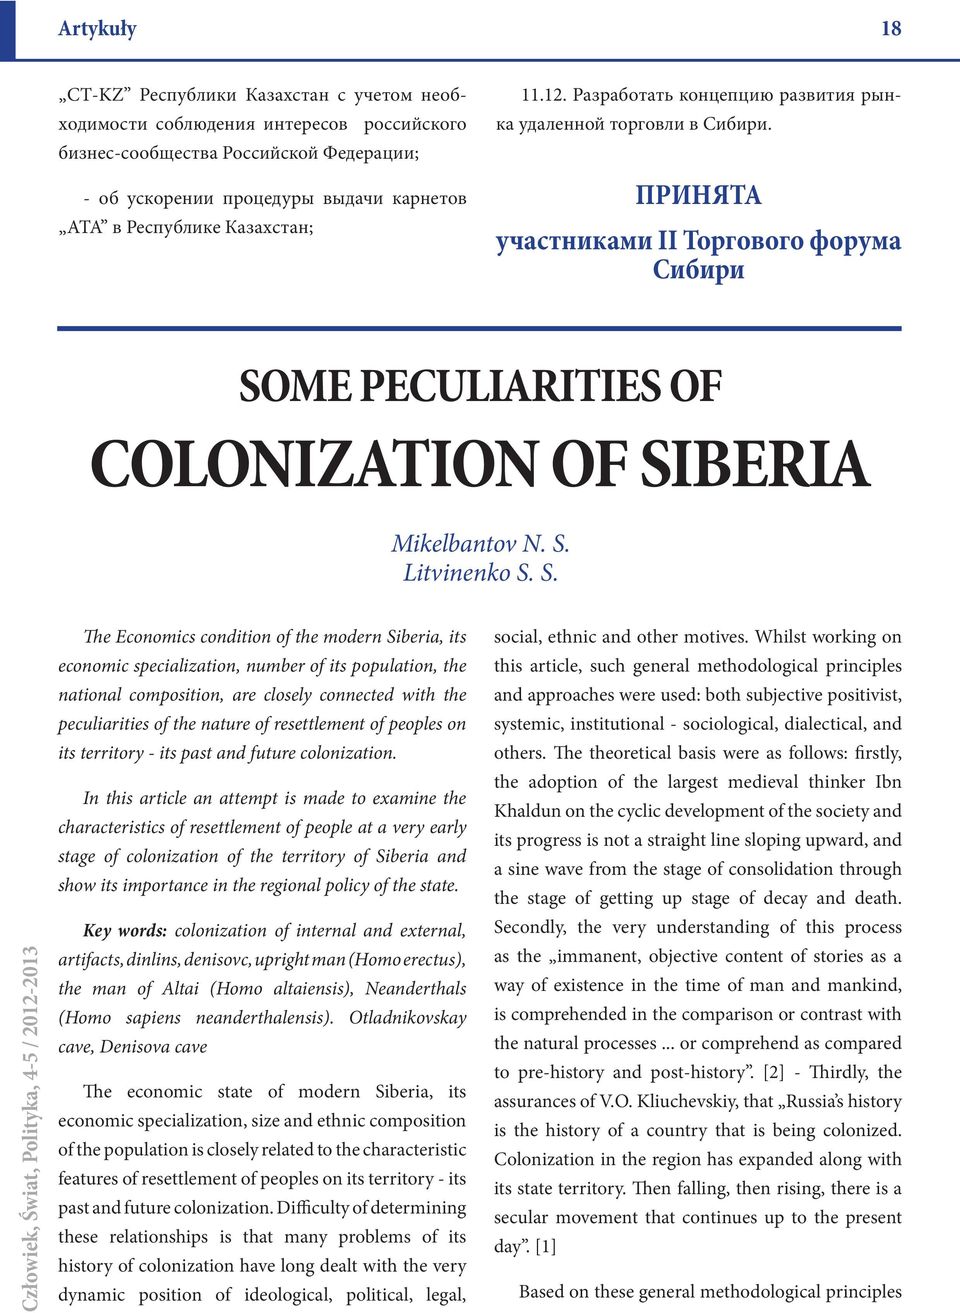 S. The Economics condition of the modern Siberia, its economic specialization, number of its population, the national composition, are closely connected with the peculiarities of the nature of